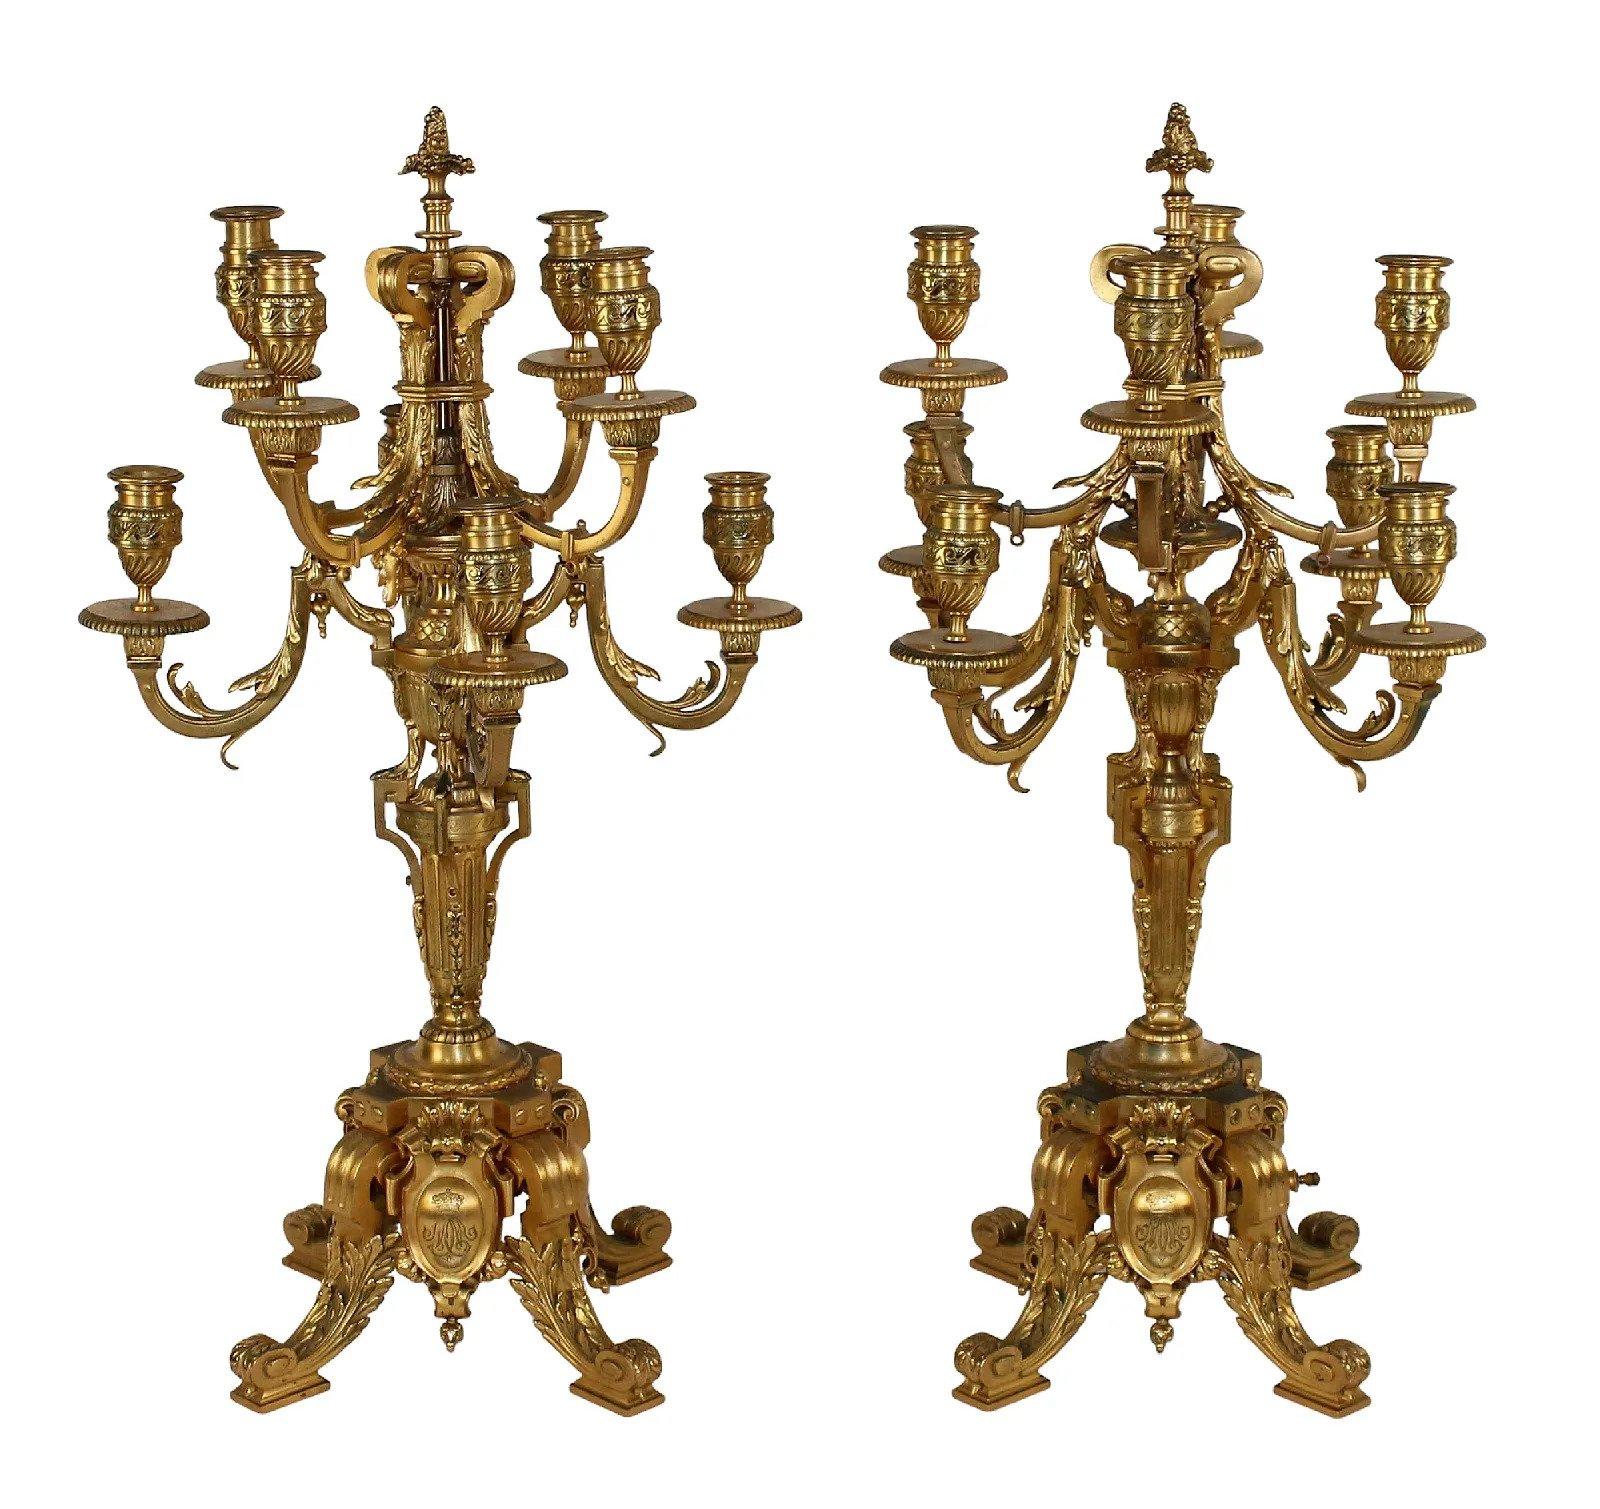 A superb pair of French Barbedienne 8 arm gilt bronze candelabra. Marked on the base F, Barbedienne. Late 19th century. Measures: Overall height 27